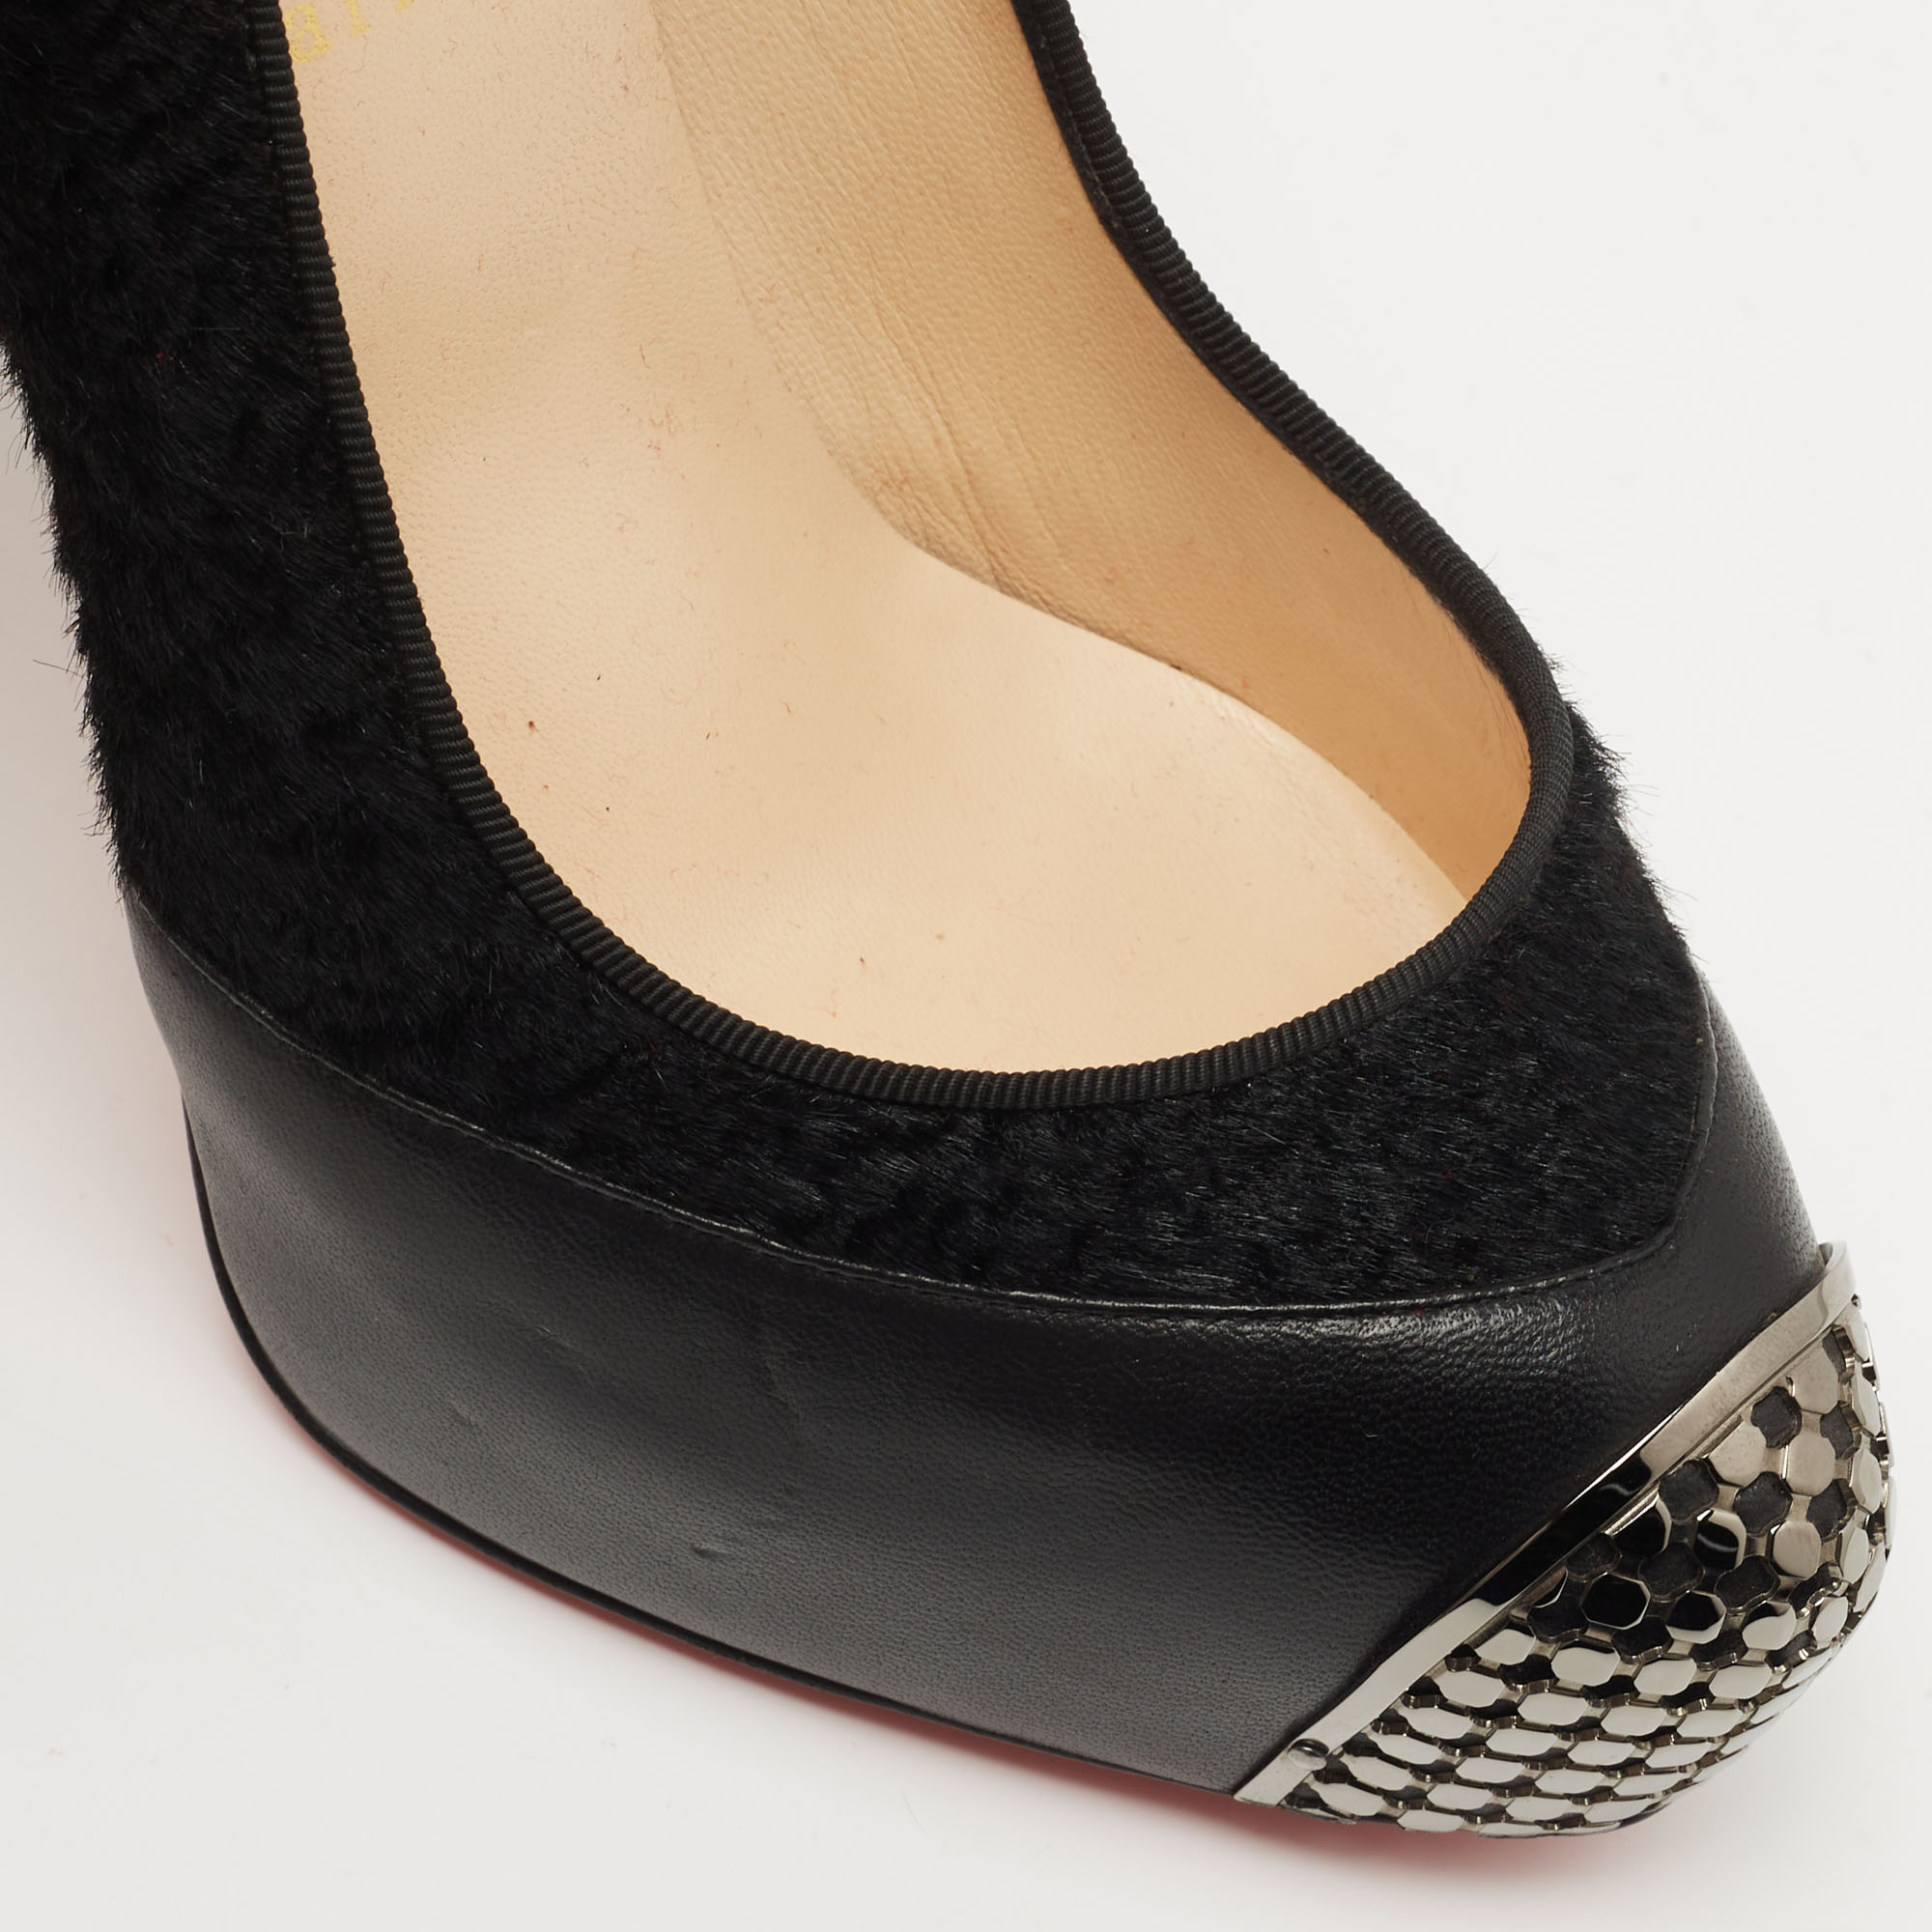 Christian Louboutin Black Calfhair And Leather Maggie Pumps Size 40